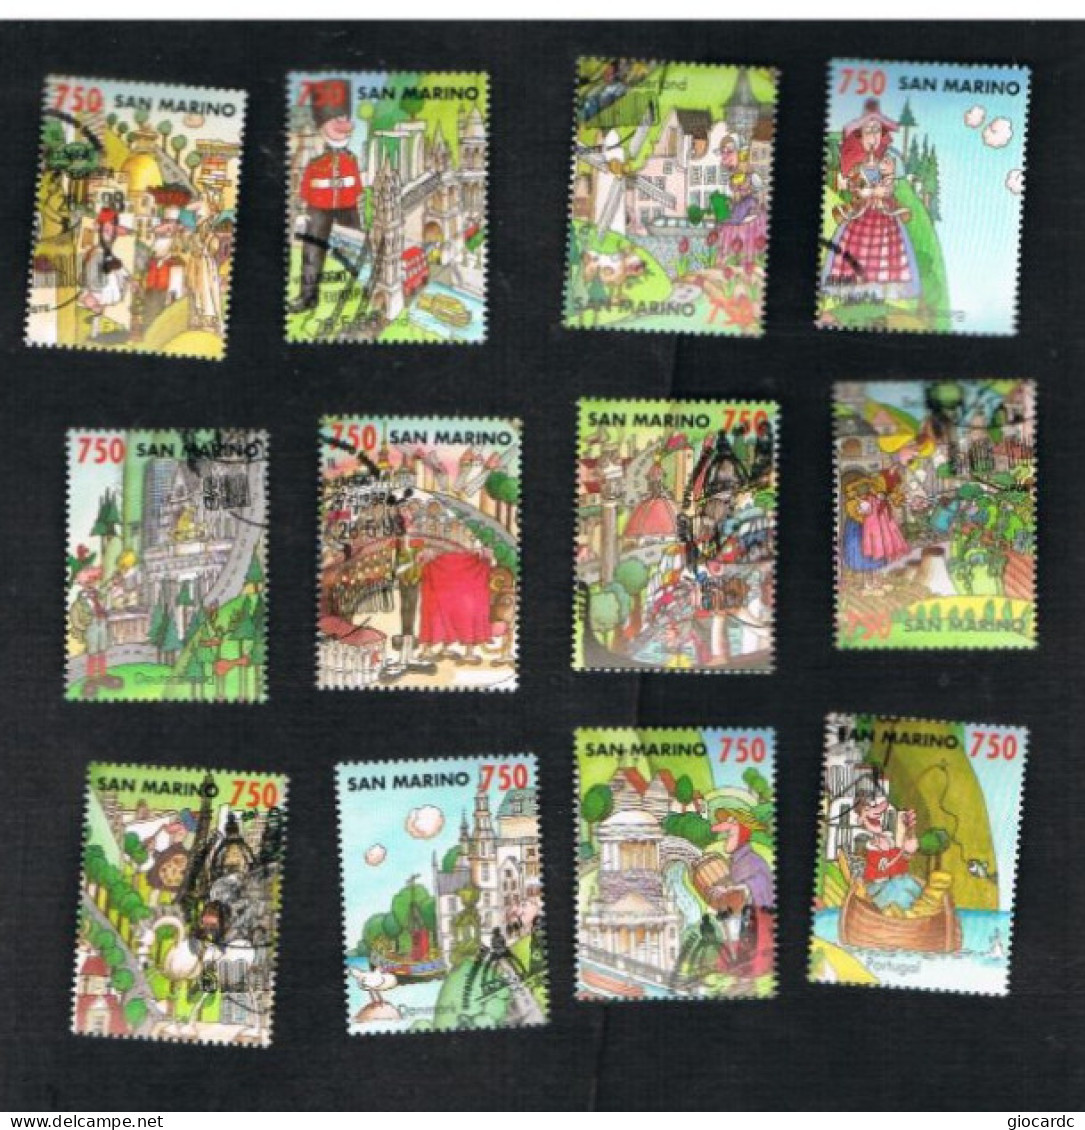 SAN MARINO - UN 1382.1393 - 1993 IL VILLAGGIO EUROPA (COMPLET SET OF 12 STAMPS, BY BF)     -  USED - Gebruikt